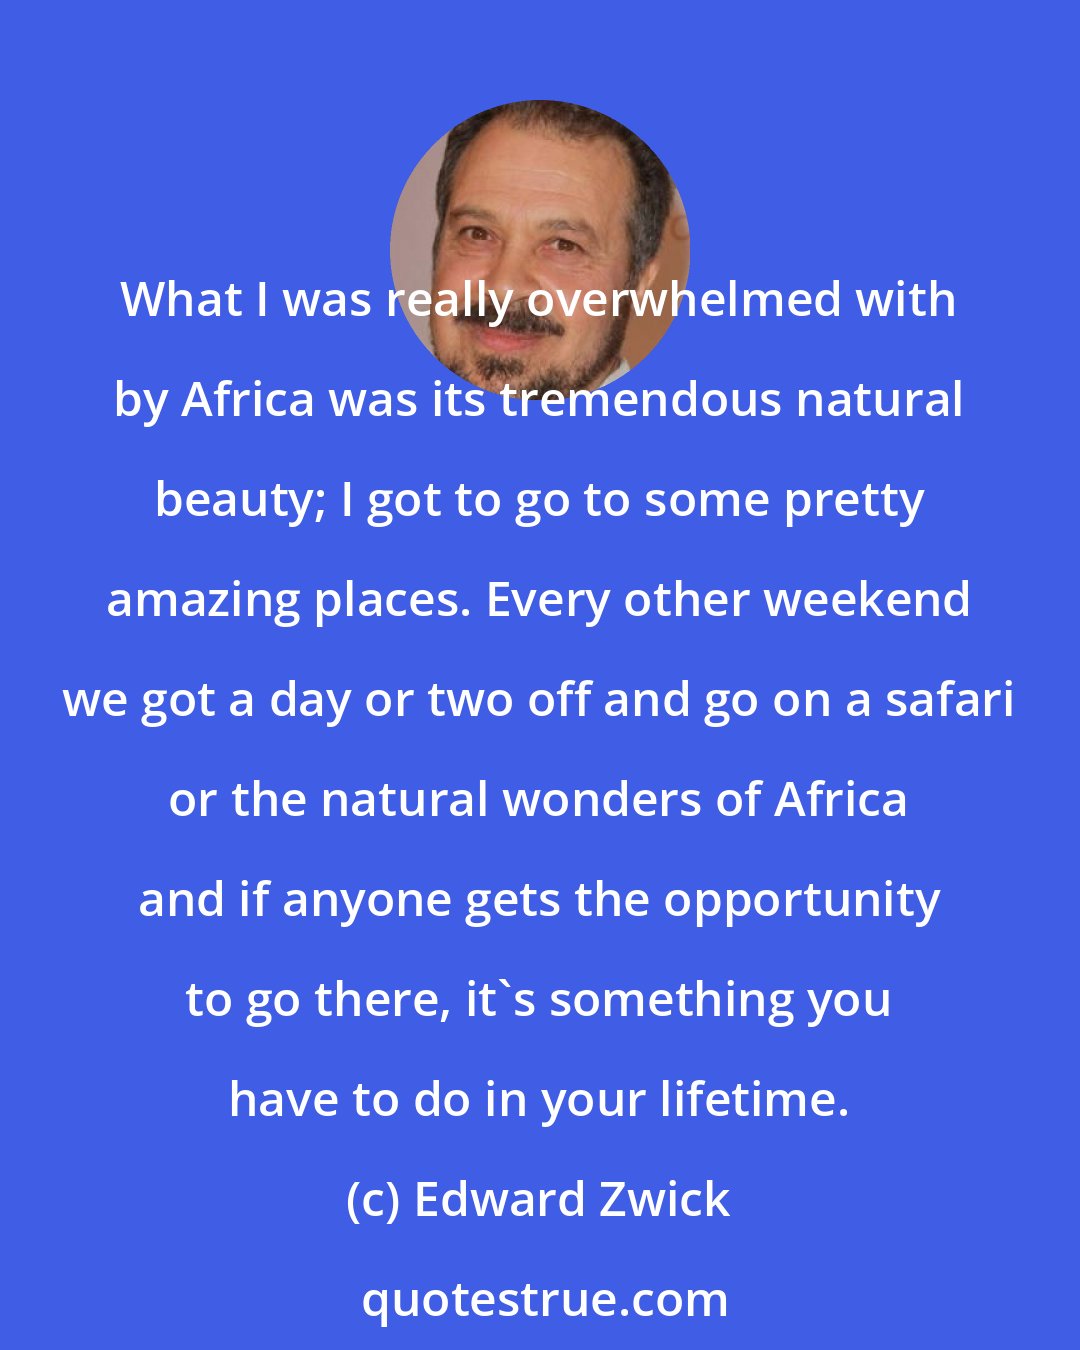 Edward Zwick: What I was really overwhelmed with by Africa was its tremendous natural beauty; I got to go to some pretty amazing places. Every other weekend we got a day or two off and go on a safari or the natural wonders of Africa and if anyone gets the opportunity to go there, it's something you have to do in your lifetime.